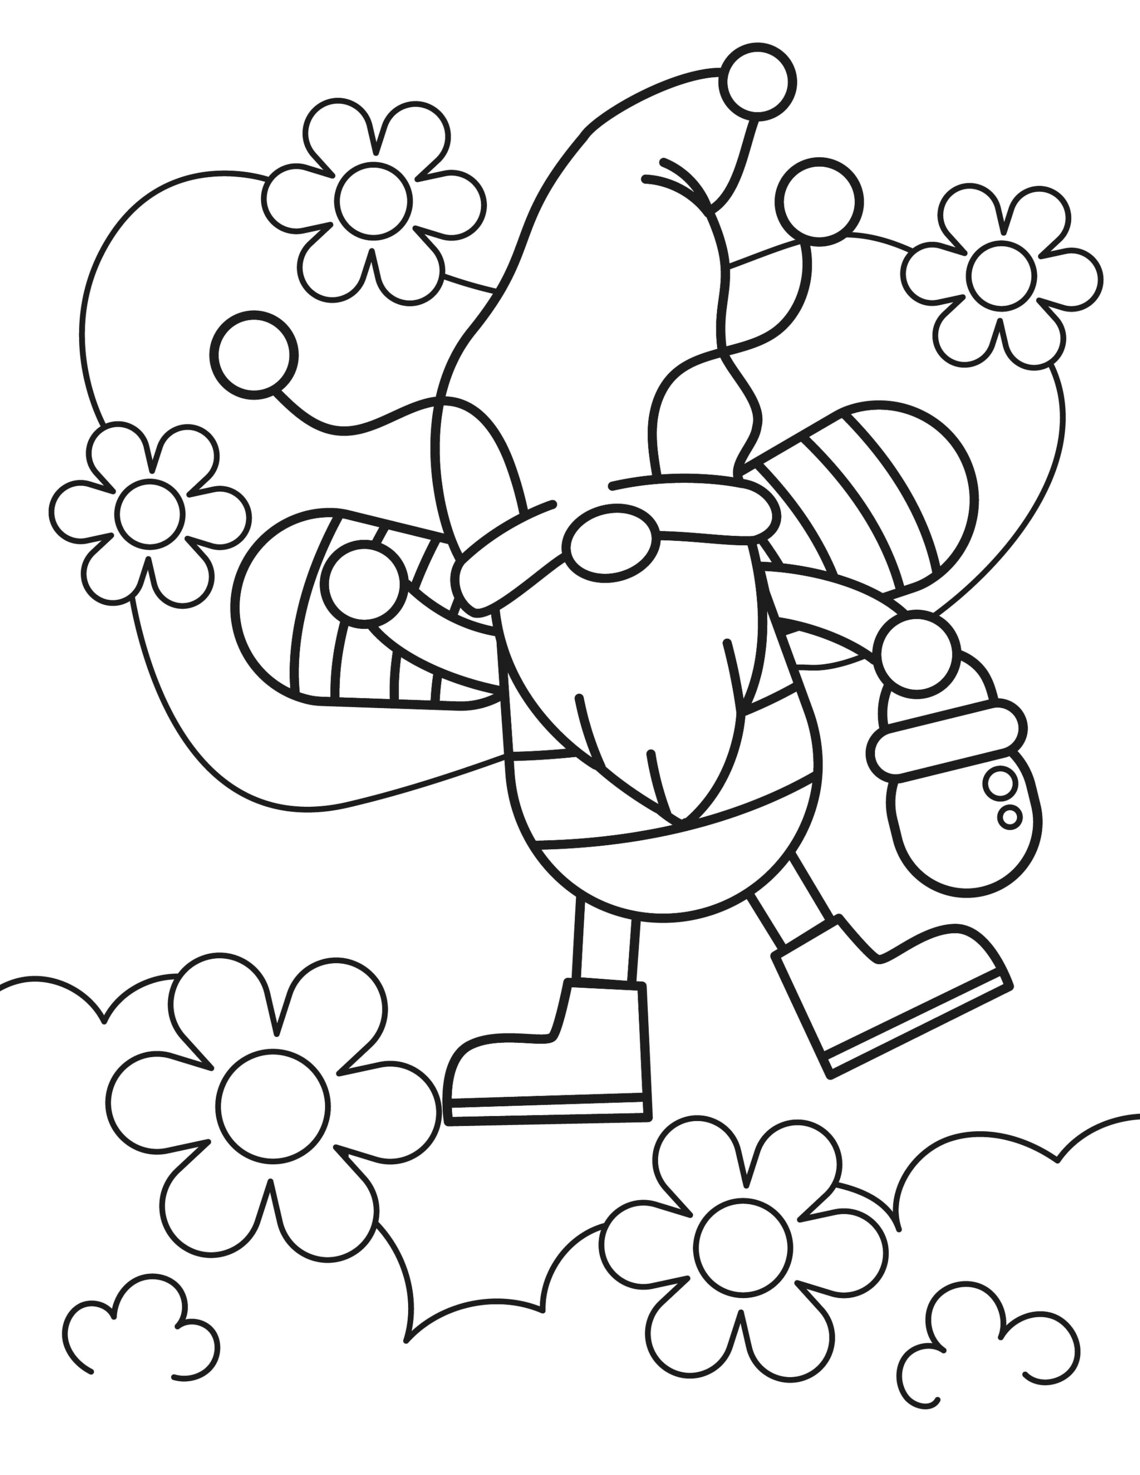 10-printable-gnome-coloring-pages-etsy